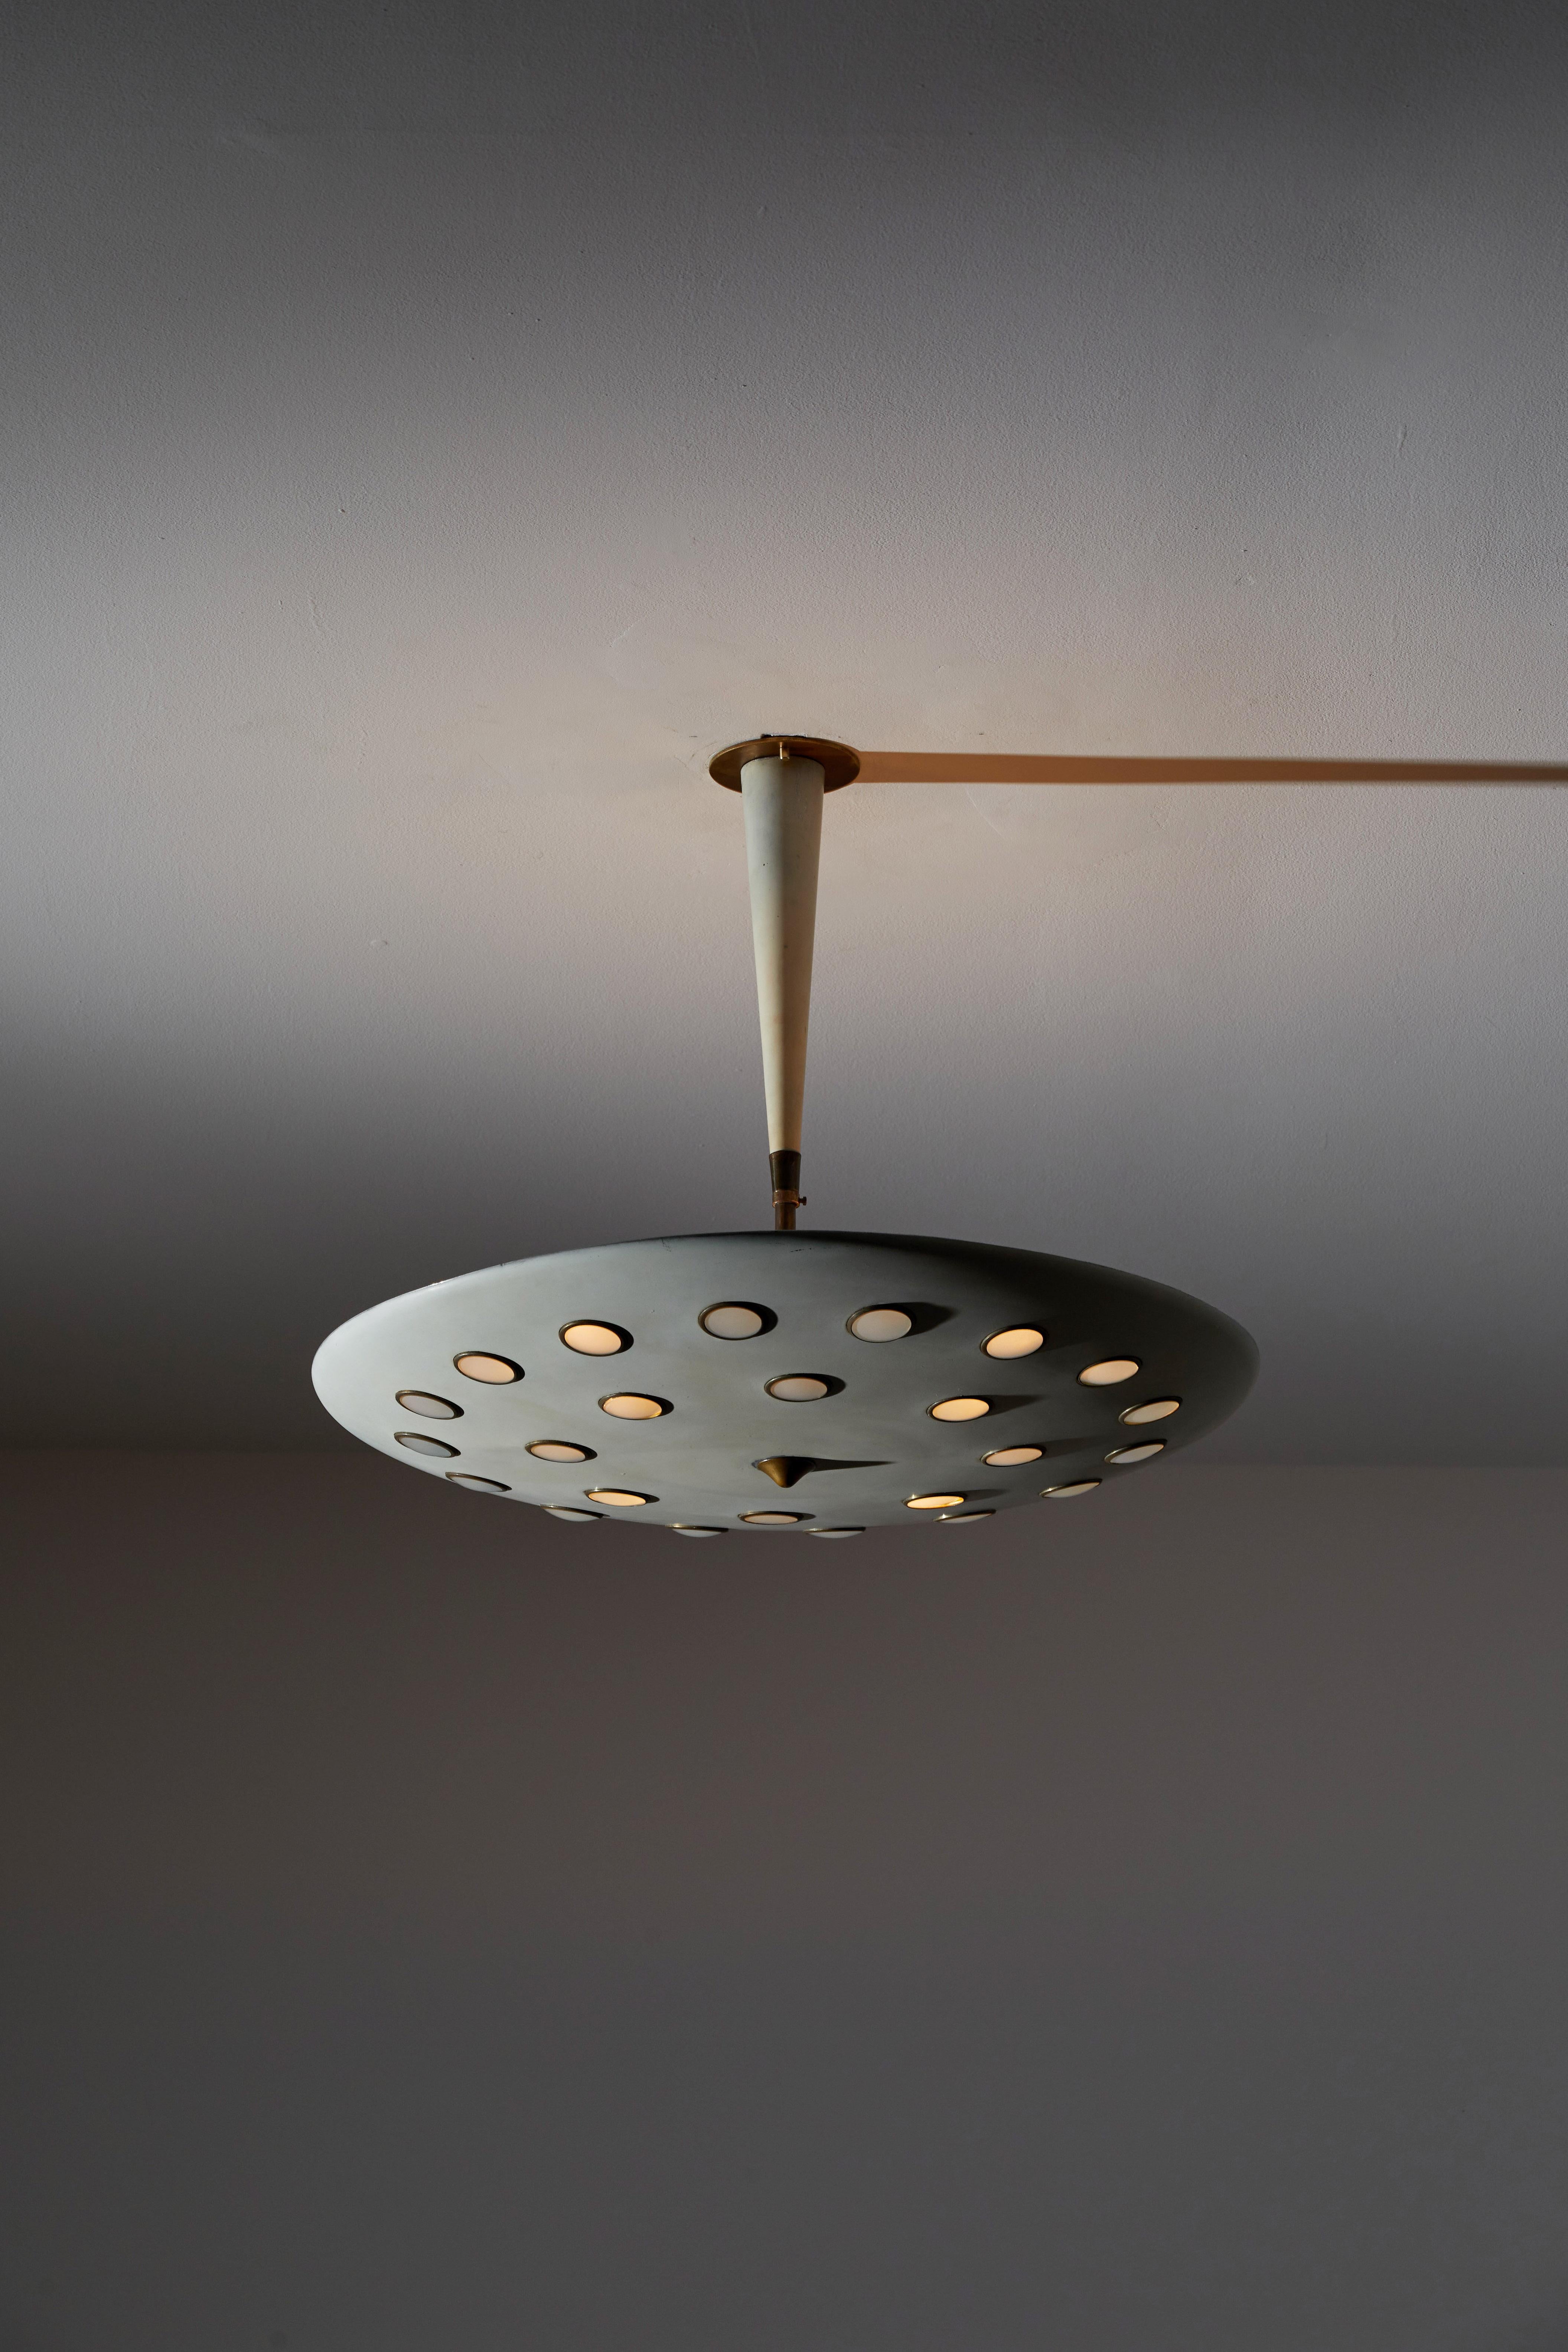 Ceiling light by Lumen. Designed and manufactured in Italy, circa 1960s. Lacquered metal, glass and brass. Custom brass ceiling plate. Rewired for U.S. standards. We recommend three E27 100w maximum bulbs. Bulbs provided as a one time courtesy.